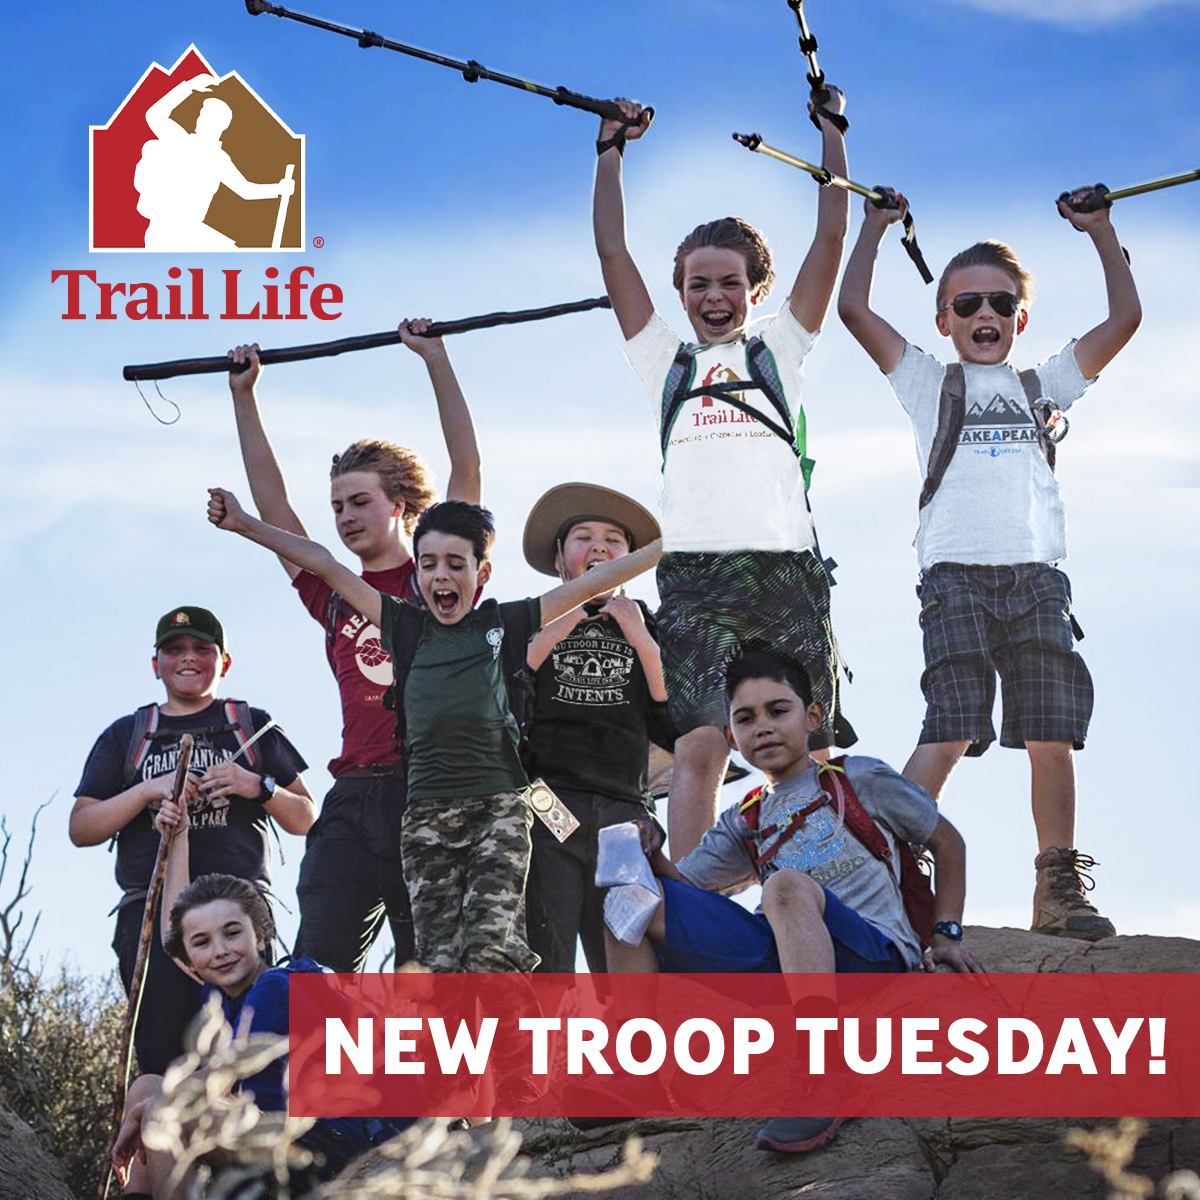 #TrailLife continues to grow! Please join us in welcoming 5 new Troops to the Trail Life family! Join the Adventure! Find a Troop near you or Start one Today!

TX-5146 Sanger
OR-1531 Salem
ID-3167 Idaho Falls
TN-0419 Crossville
OH-4316 Westerville
traillifeusa.co/3UXHnPX